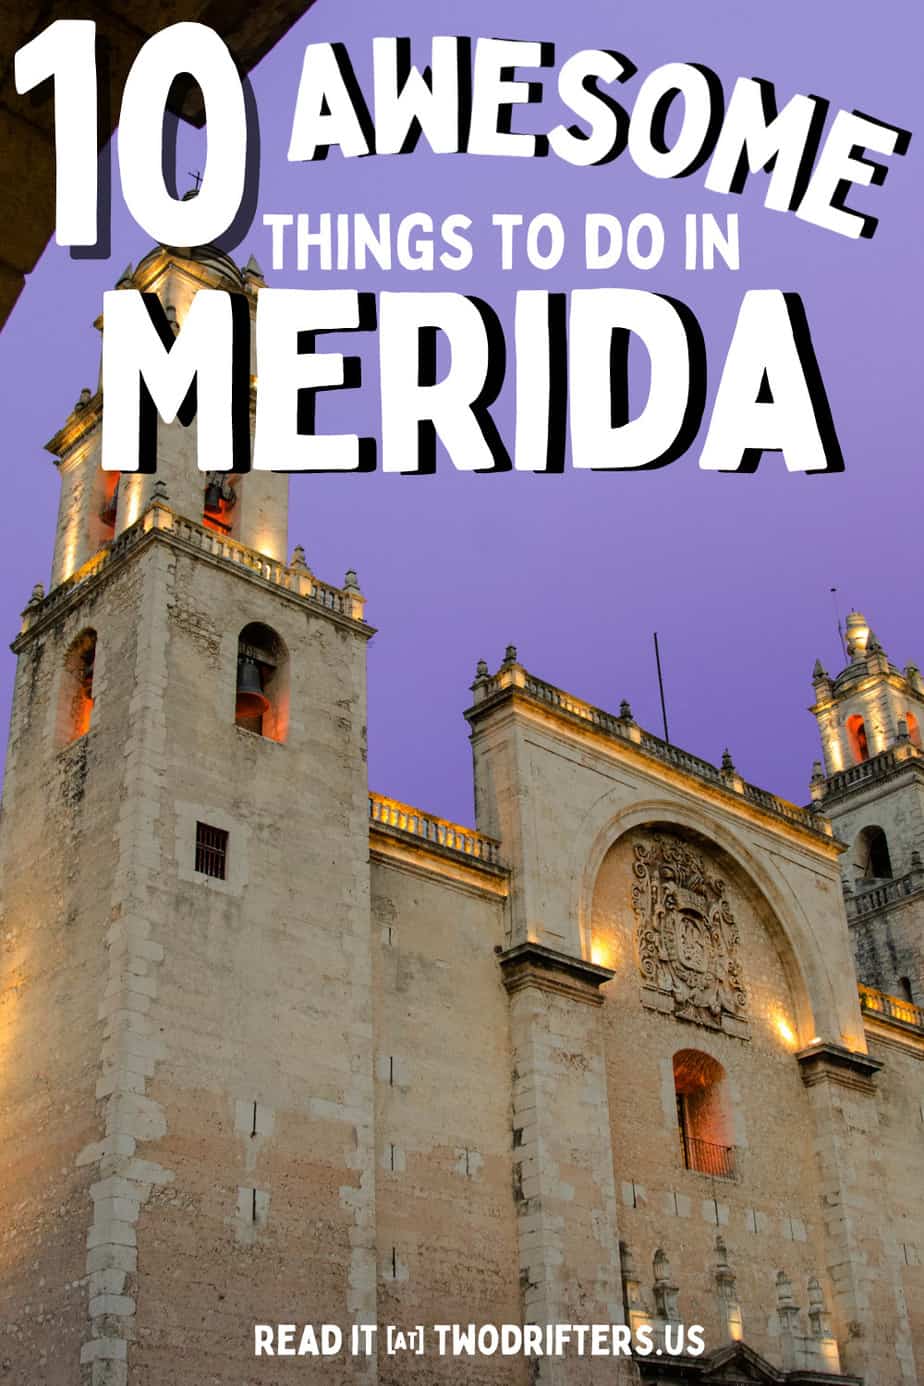 Pinterest social image that says “10 awesome things to do in Merida.”